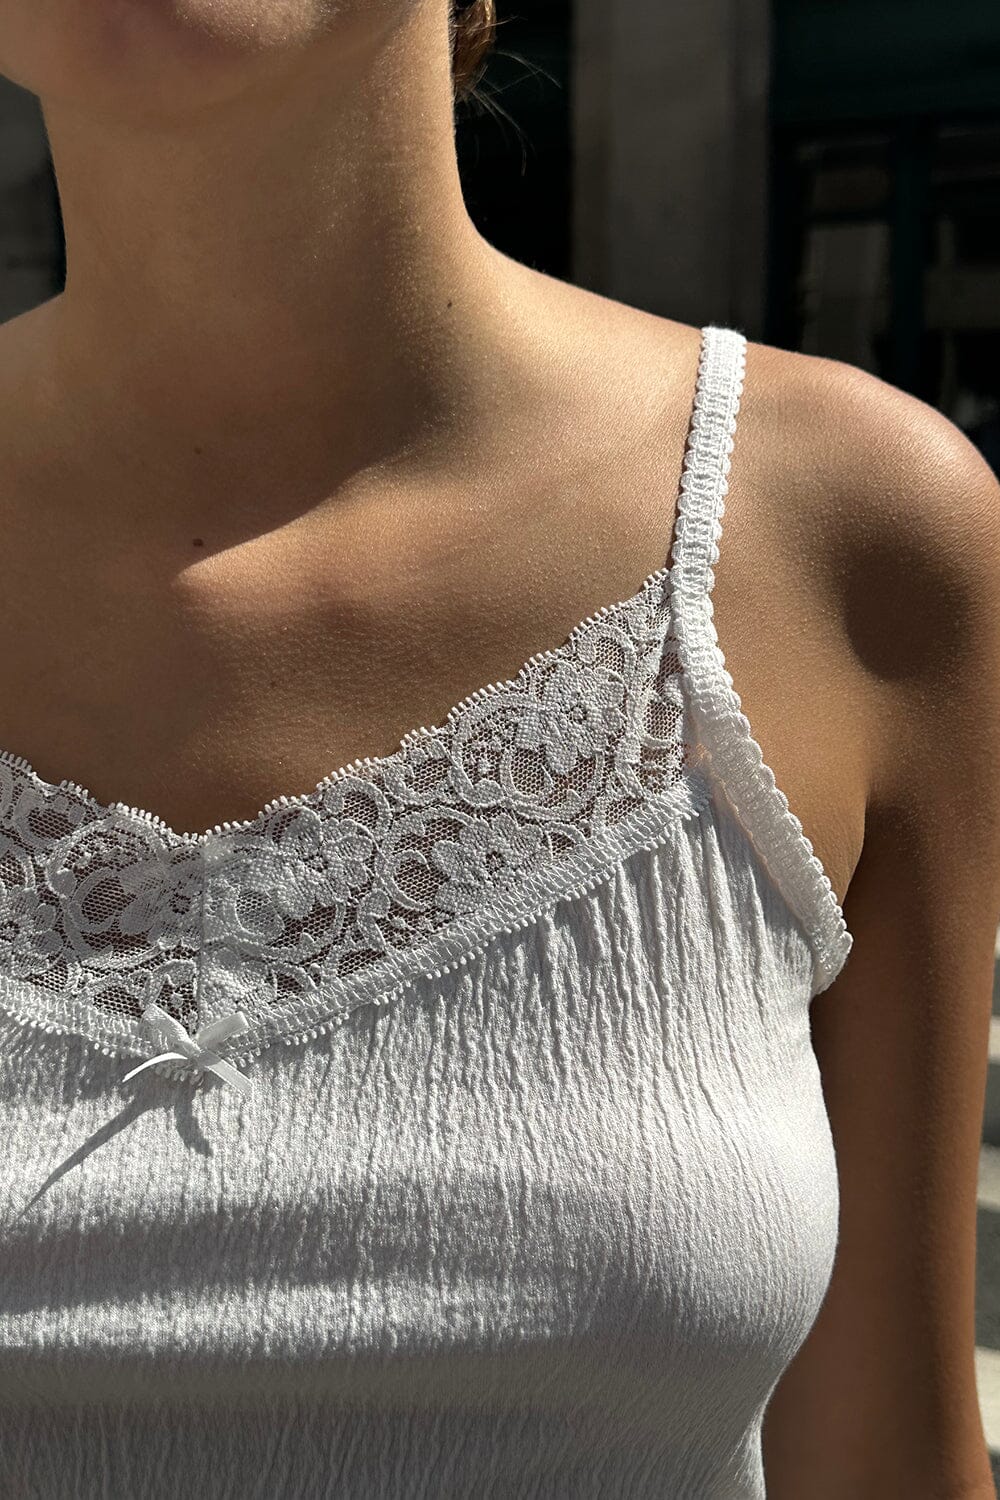 1,000+ affordable white brandy melville tank For Sale